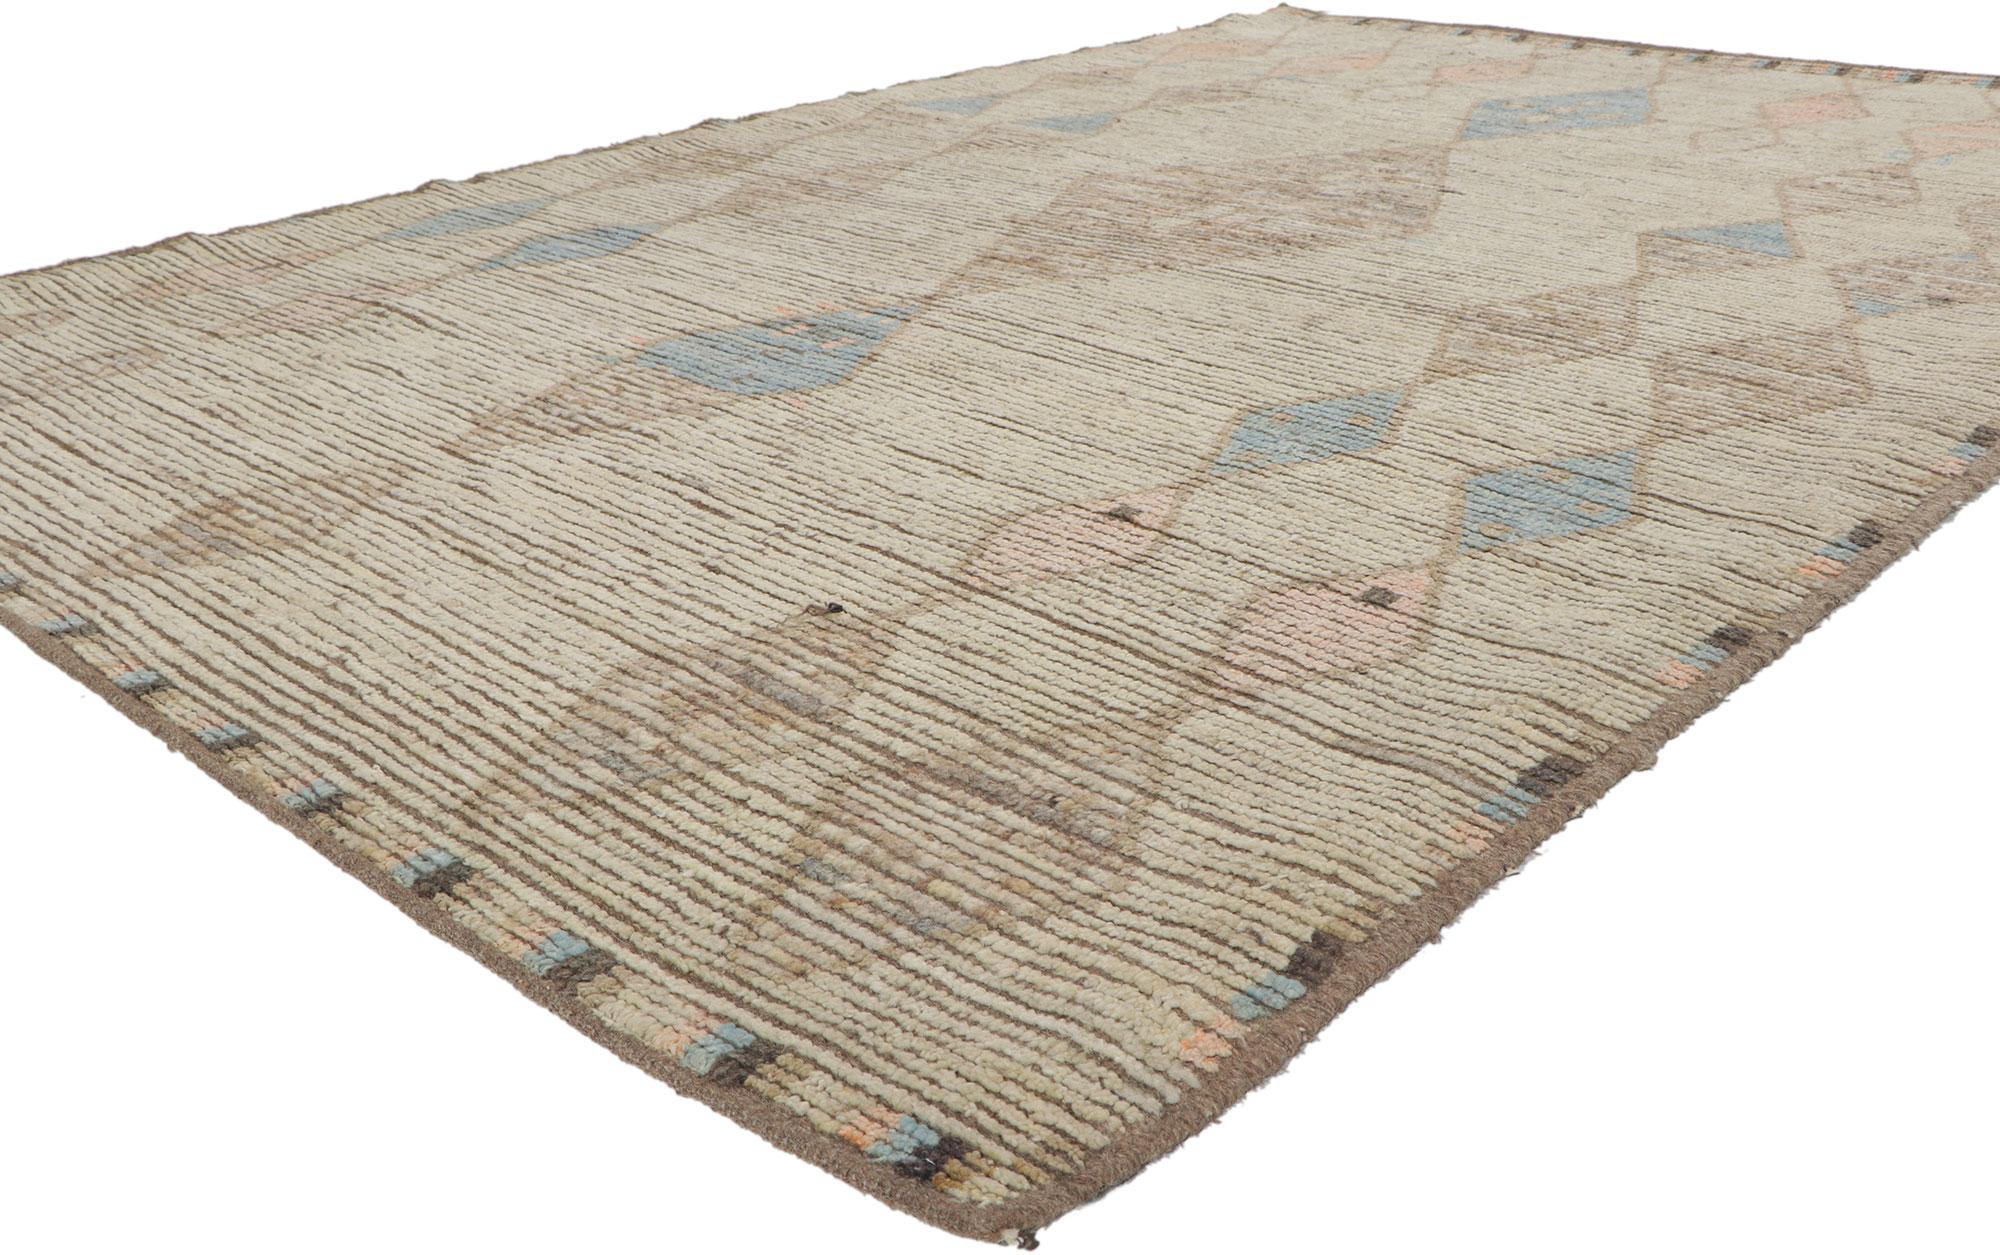 80788 New Contemporary Moroccan rug with Short Pile, 06'06 x 09'08. With its simplicity, incredible detail and texture, this hand knotted wool contemporary Moroccan rug is a captivating vision of woven beauty. The eye-catching geometric pattern and